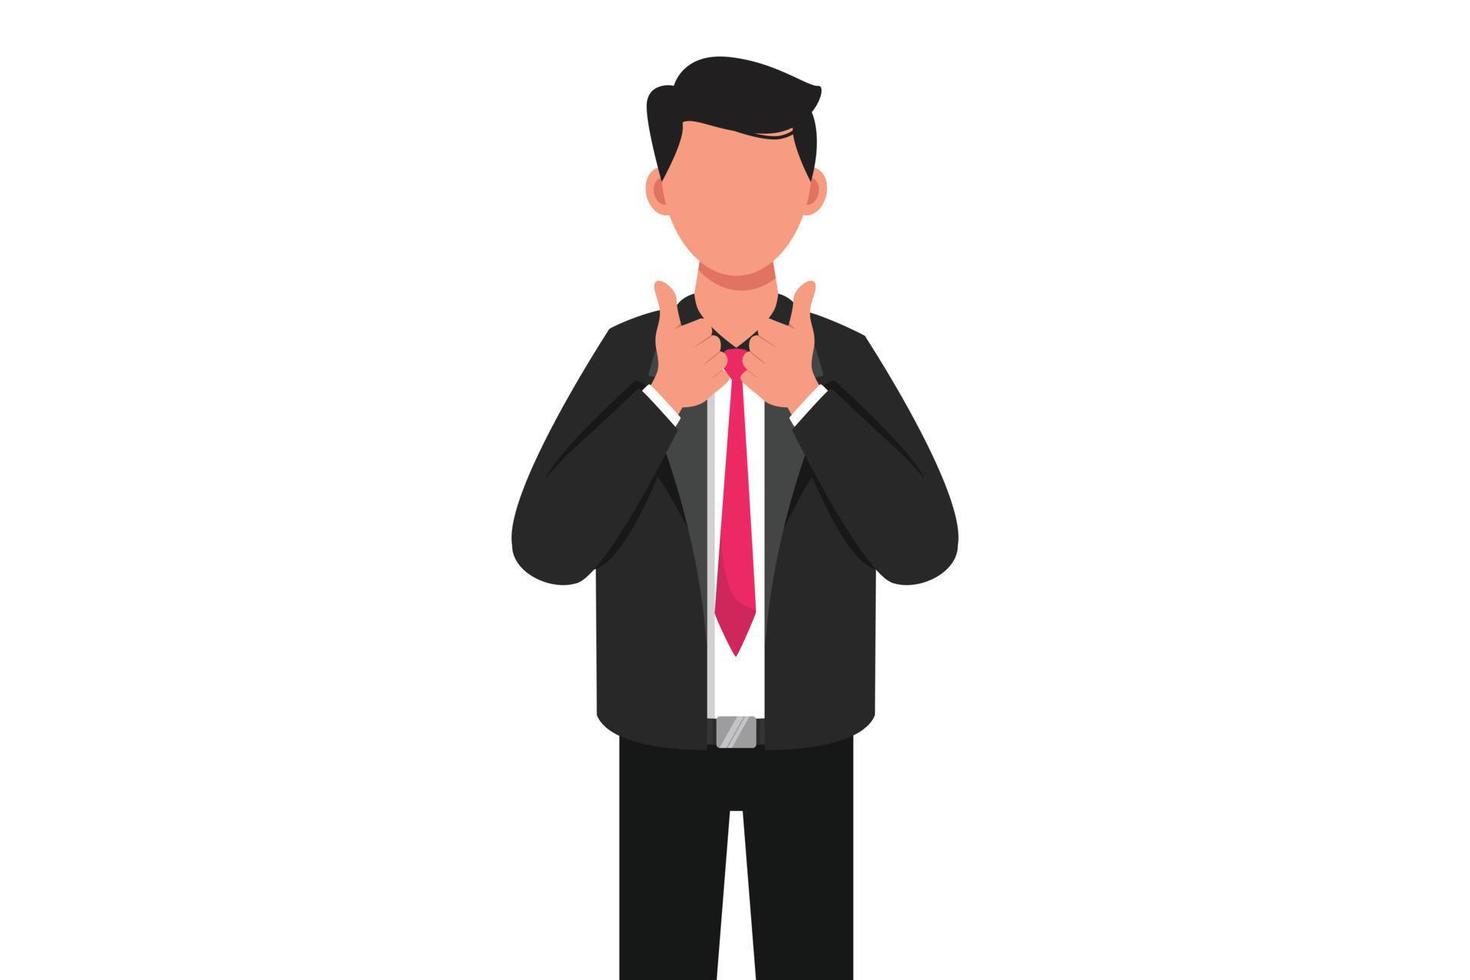 Business design drawing excited businessman dressed in black formal wear showing thumbs up sign. Like, agree, approve, accept. Man with two thumbs up gesture. Flat cartoon style vector illustration